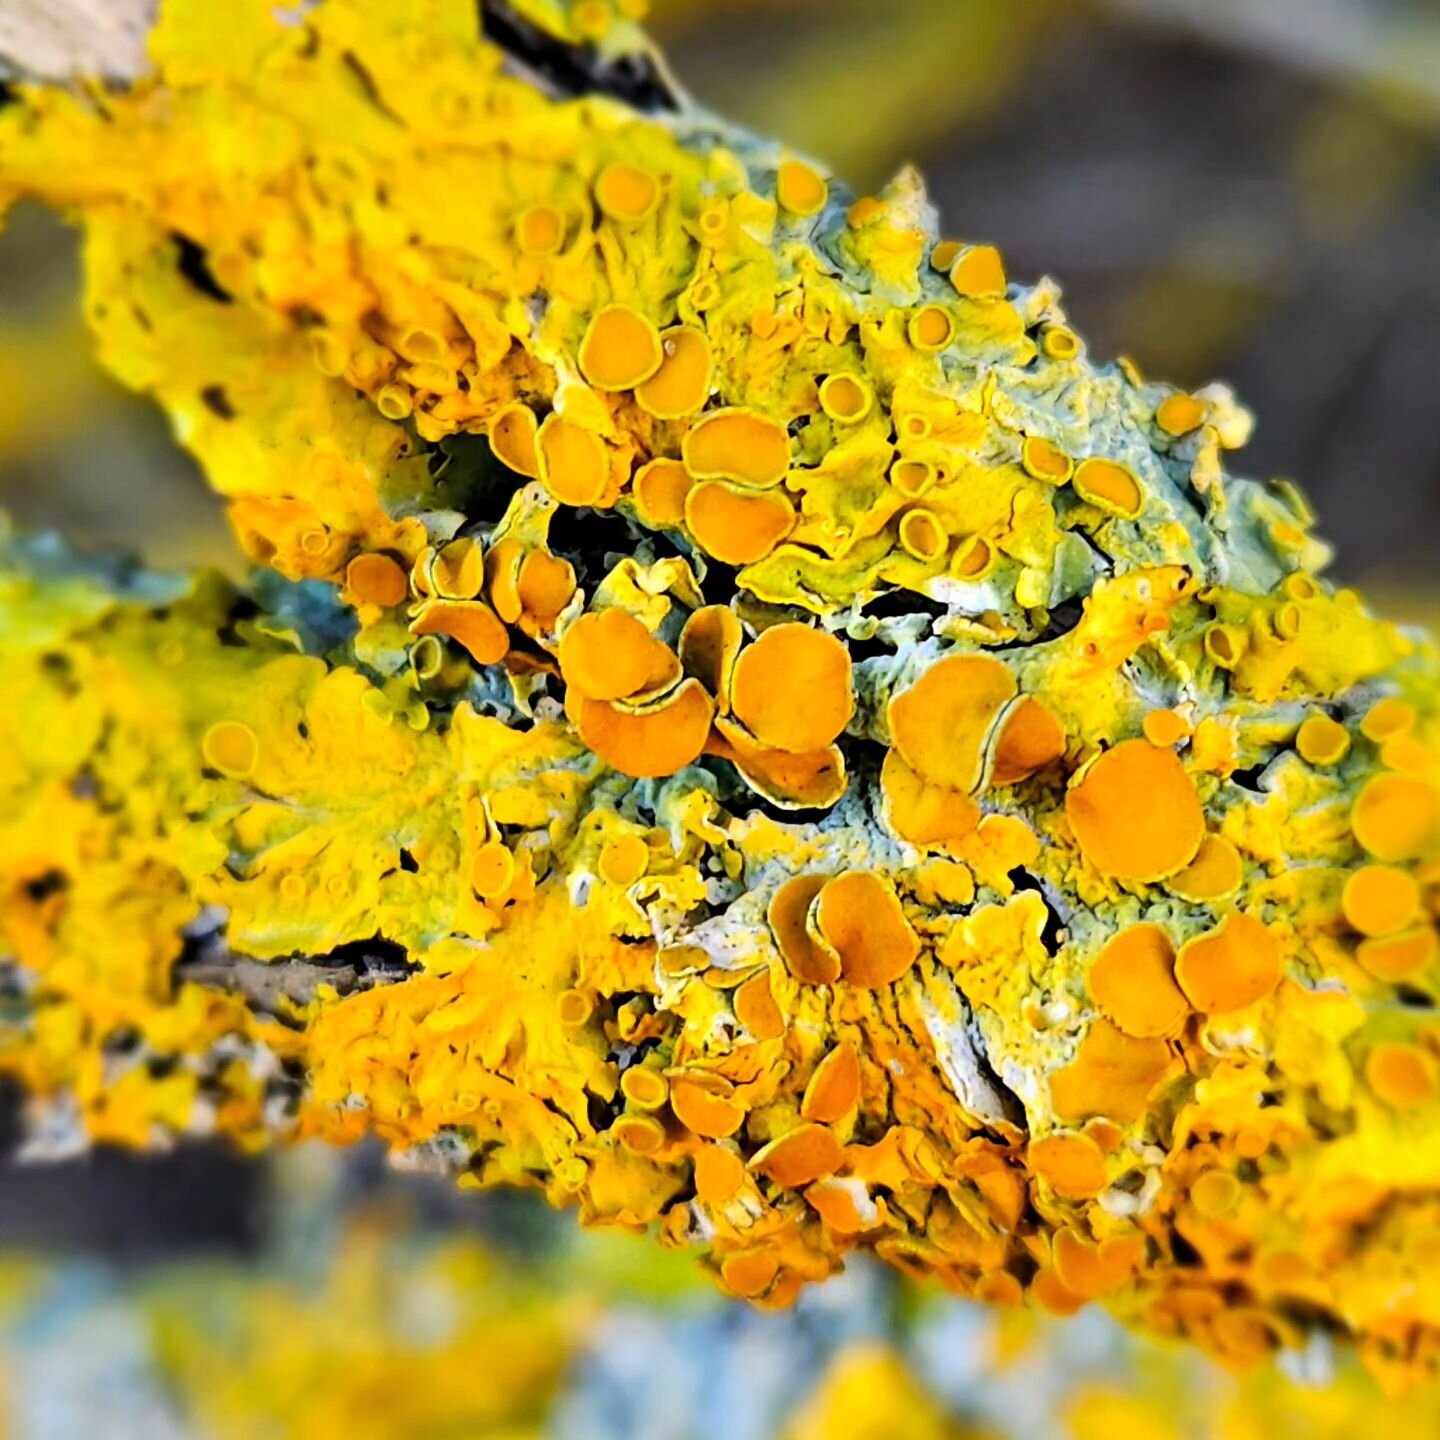 💛 Lichen...spotted during my lunchtime walk at Longniddry beach. I just love their beautiful colour and texture.

💛 Do you know that they are actually a symbiotic partnership between two organisms? The fungus provides the body of the lichen, protec